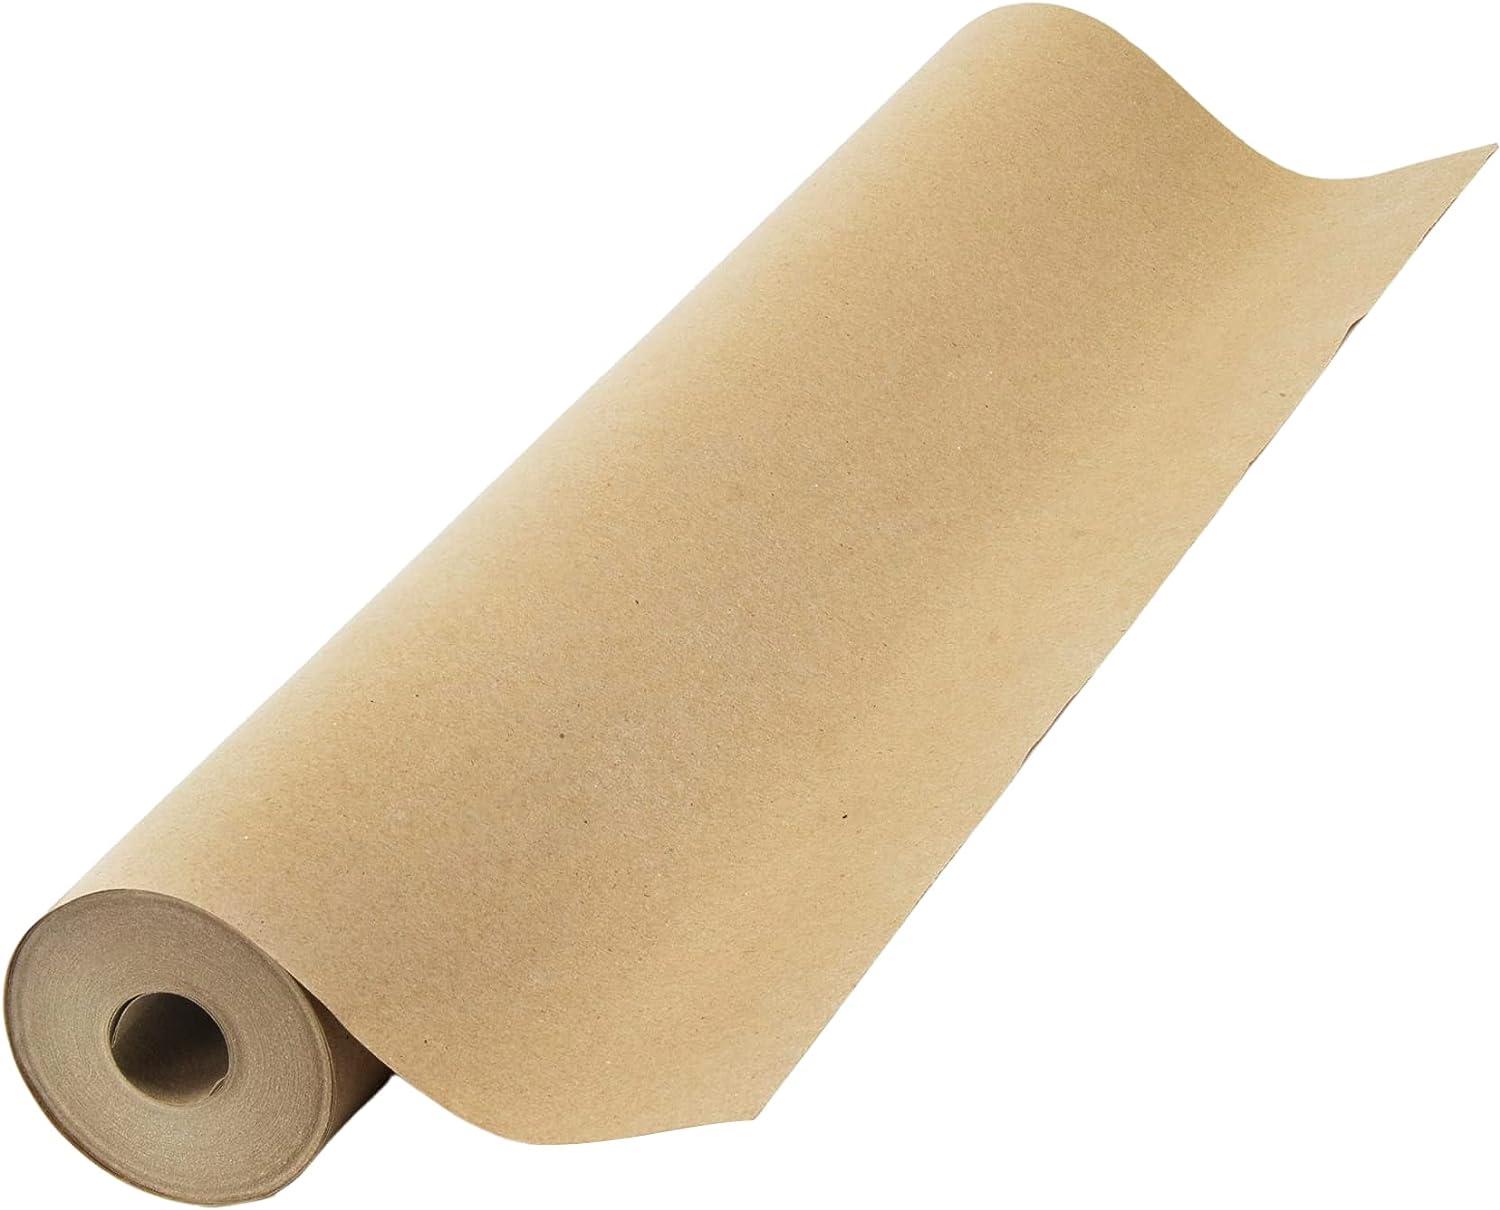 GLAMFIELDS Brown Wrapping Paper, Craft Paper 15 x 1,200 (100ft), Kraft  Paper Roll for Gift Packing, Moving, Shipping, Postal, Art Crafts, Floor